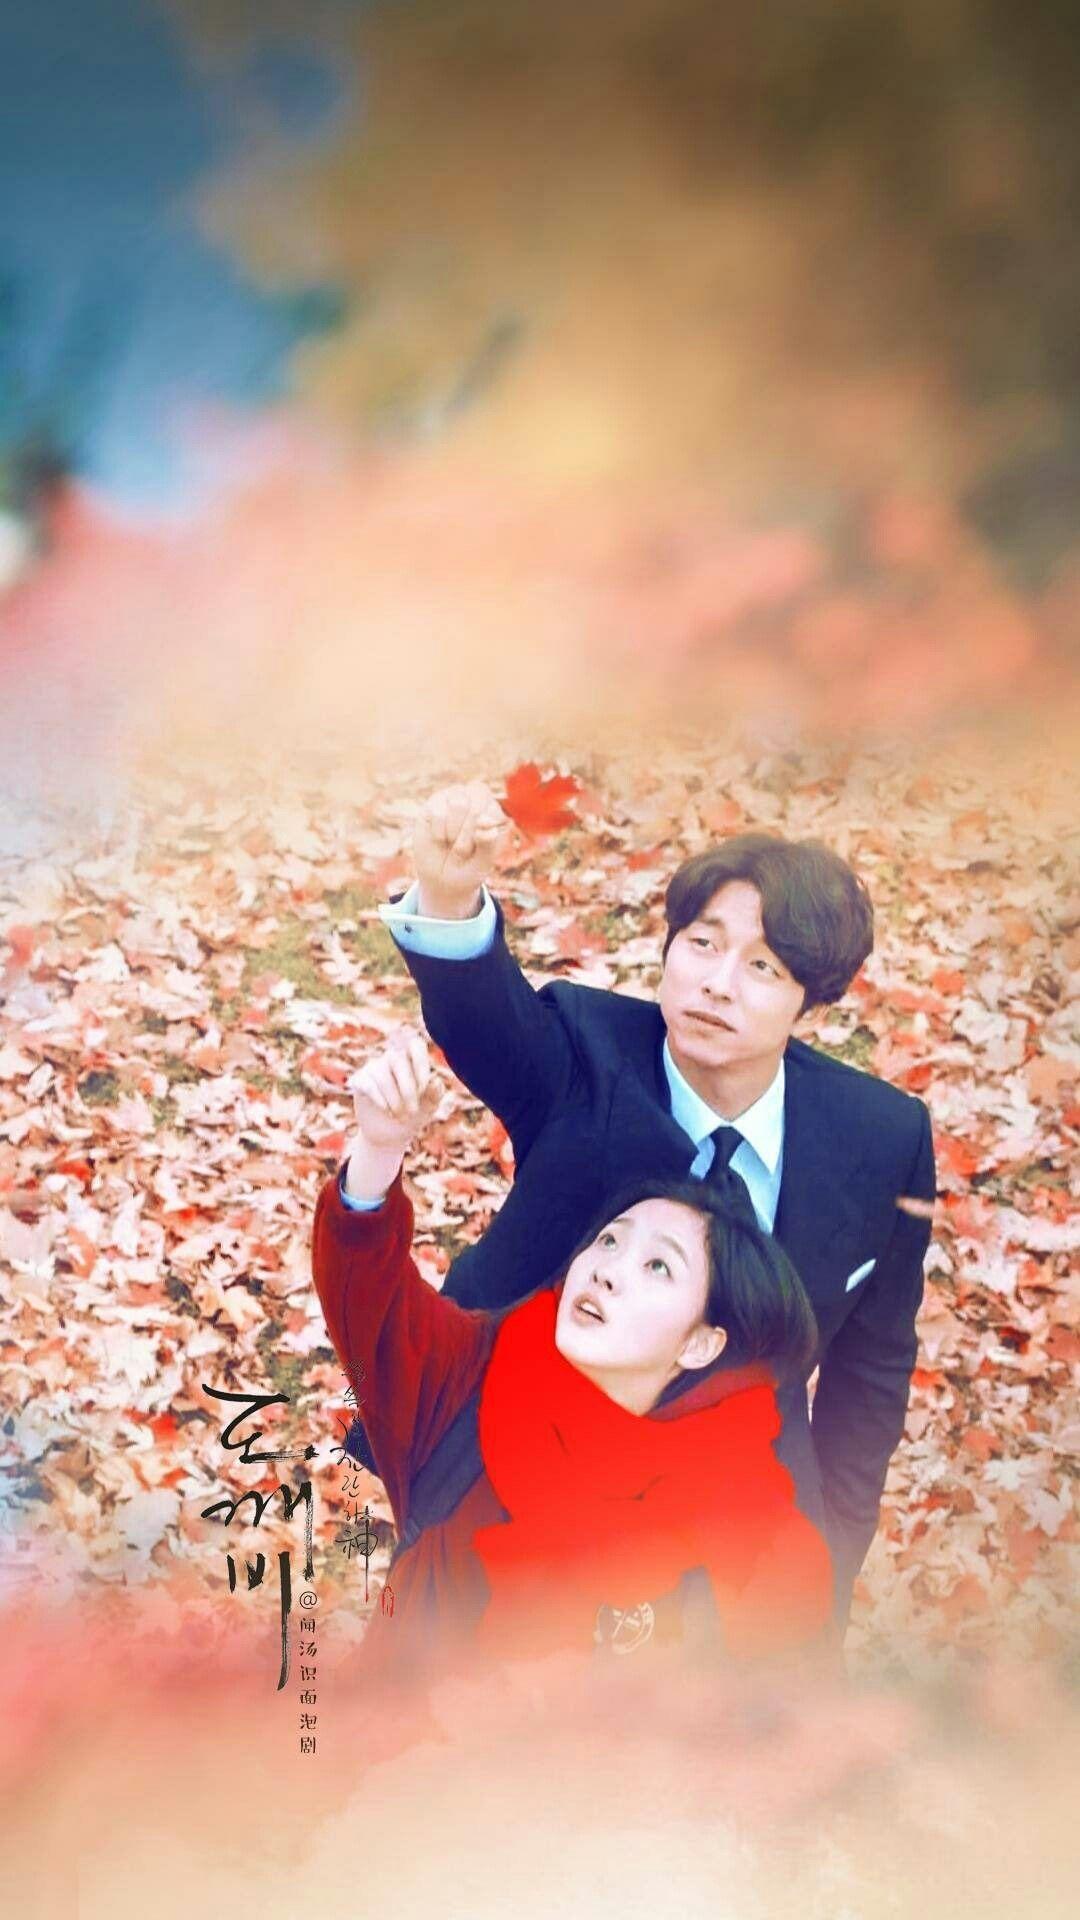 Goblin Kdrama Wallpapers - Top Free Goblin Kdrama Backgrounds